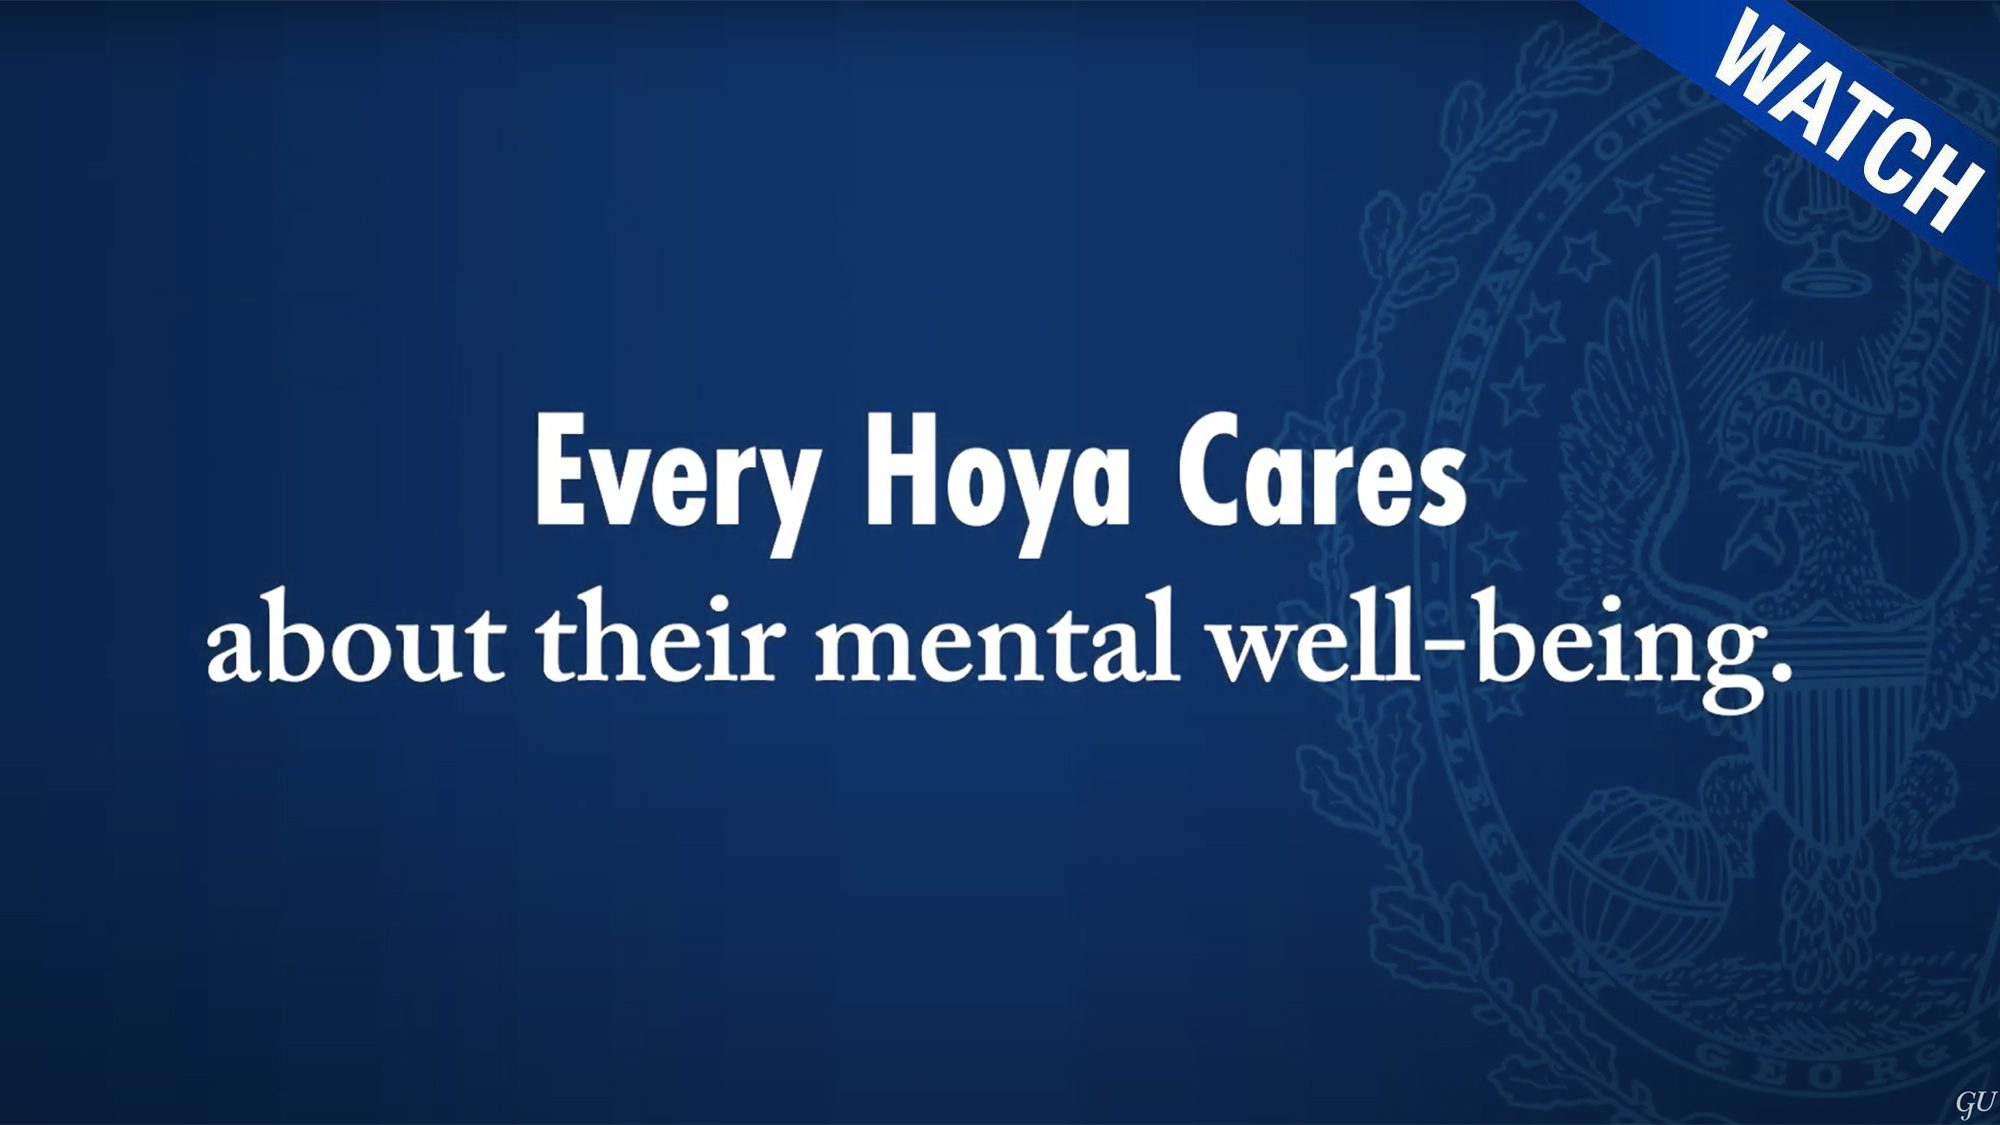 Dark blue graphic with the text &#039;Every Hoya Cares about their mental well-being&#039;